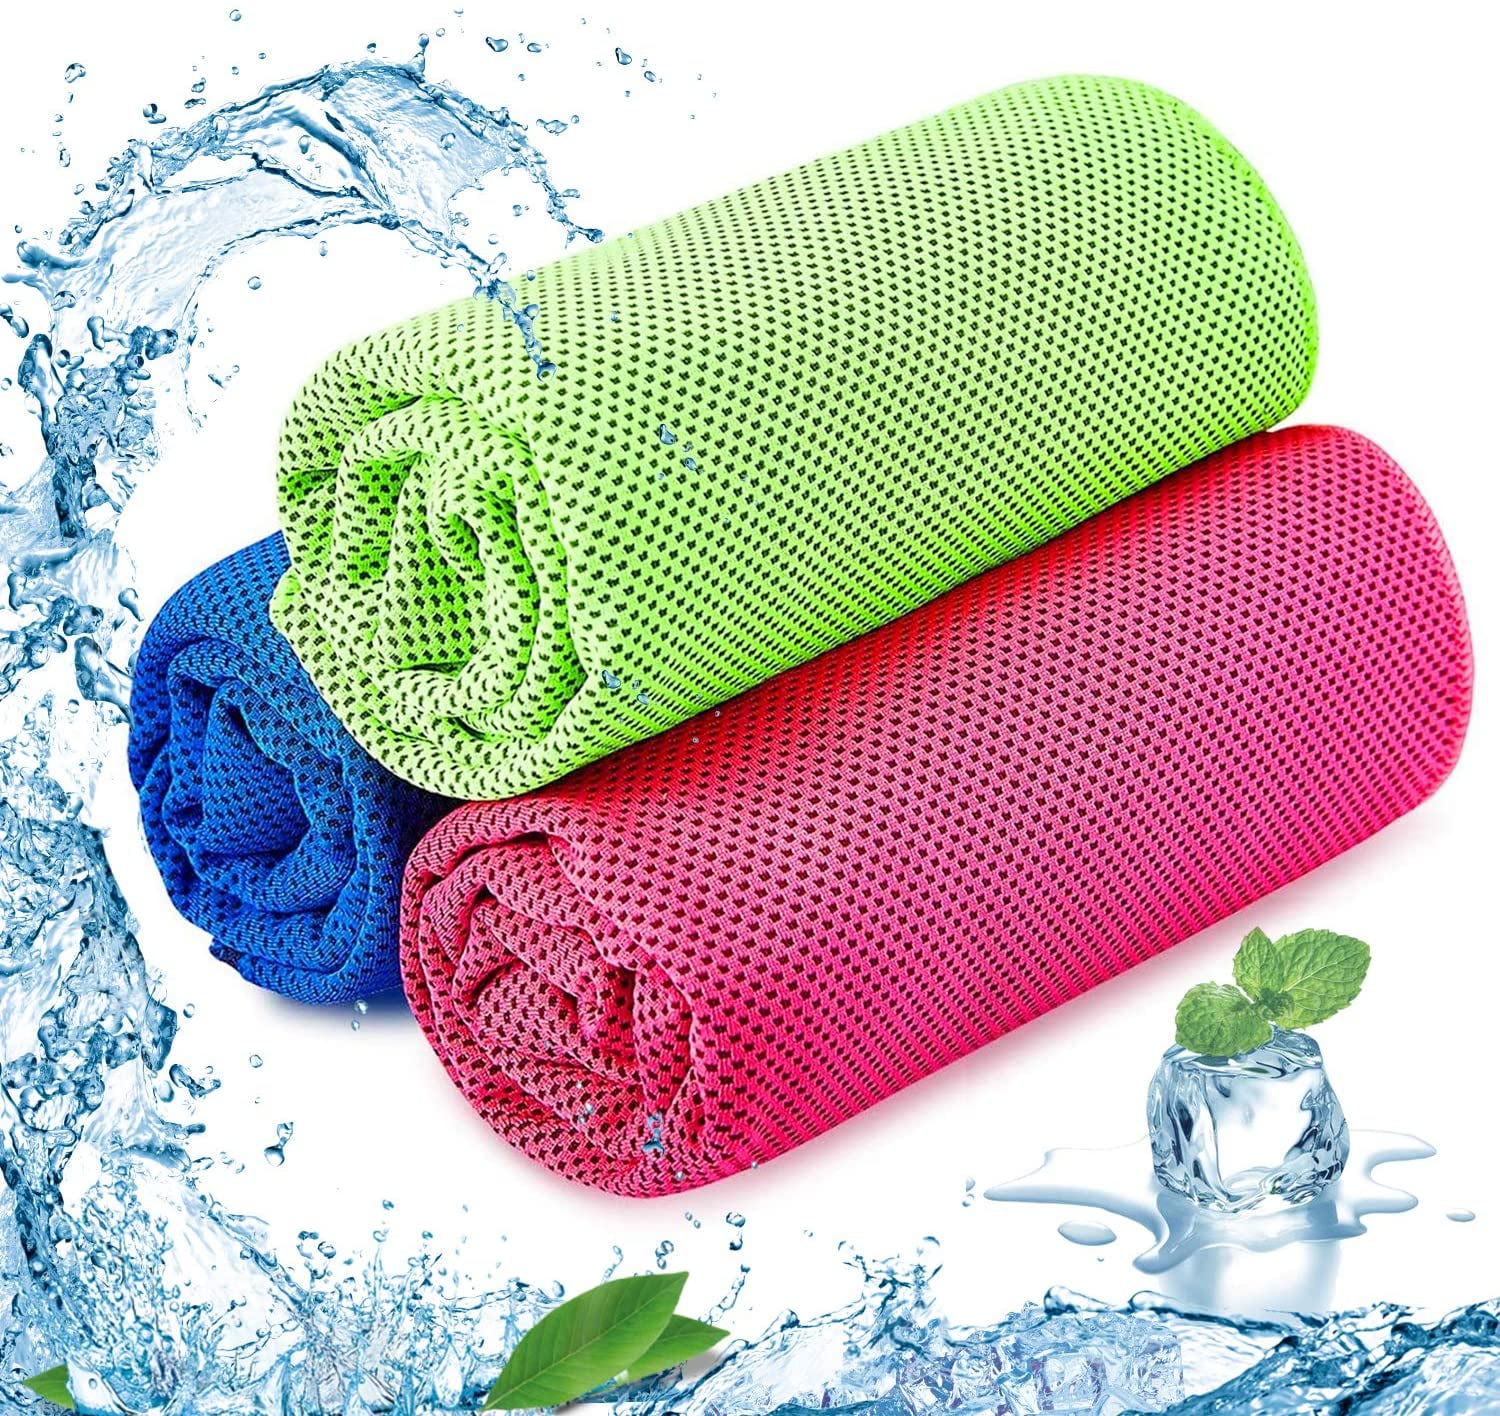 Silky Soft Sports Cooling Towel Chilly Evaporative for Gym Swimming Travel 90x30 